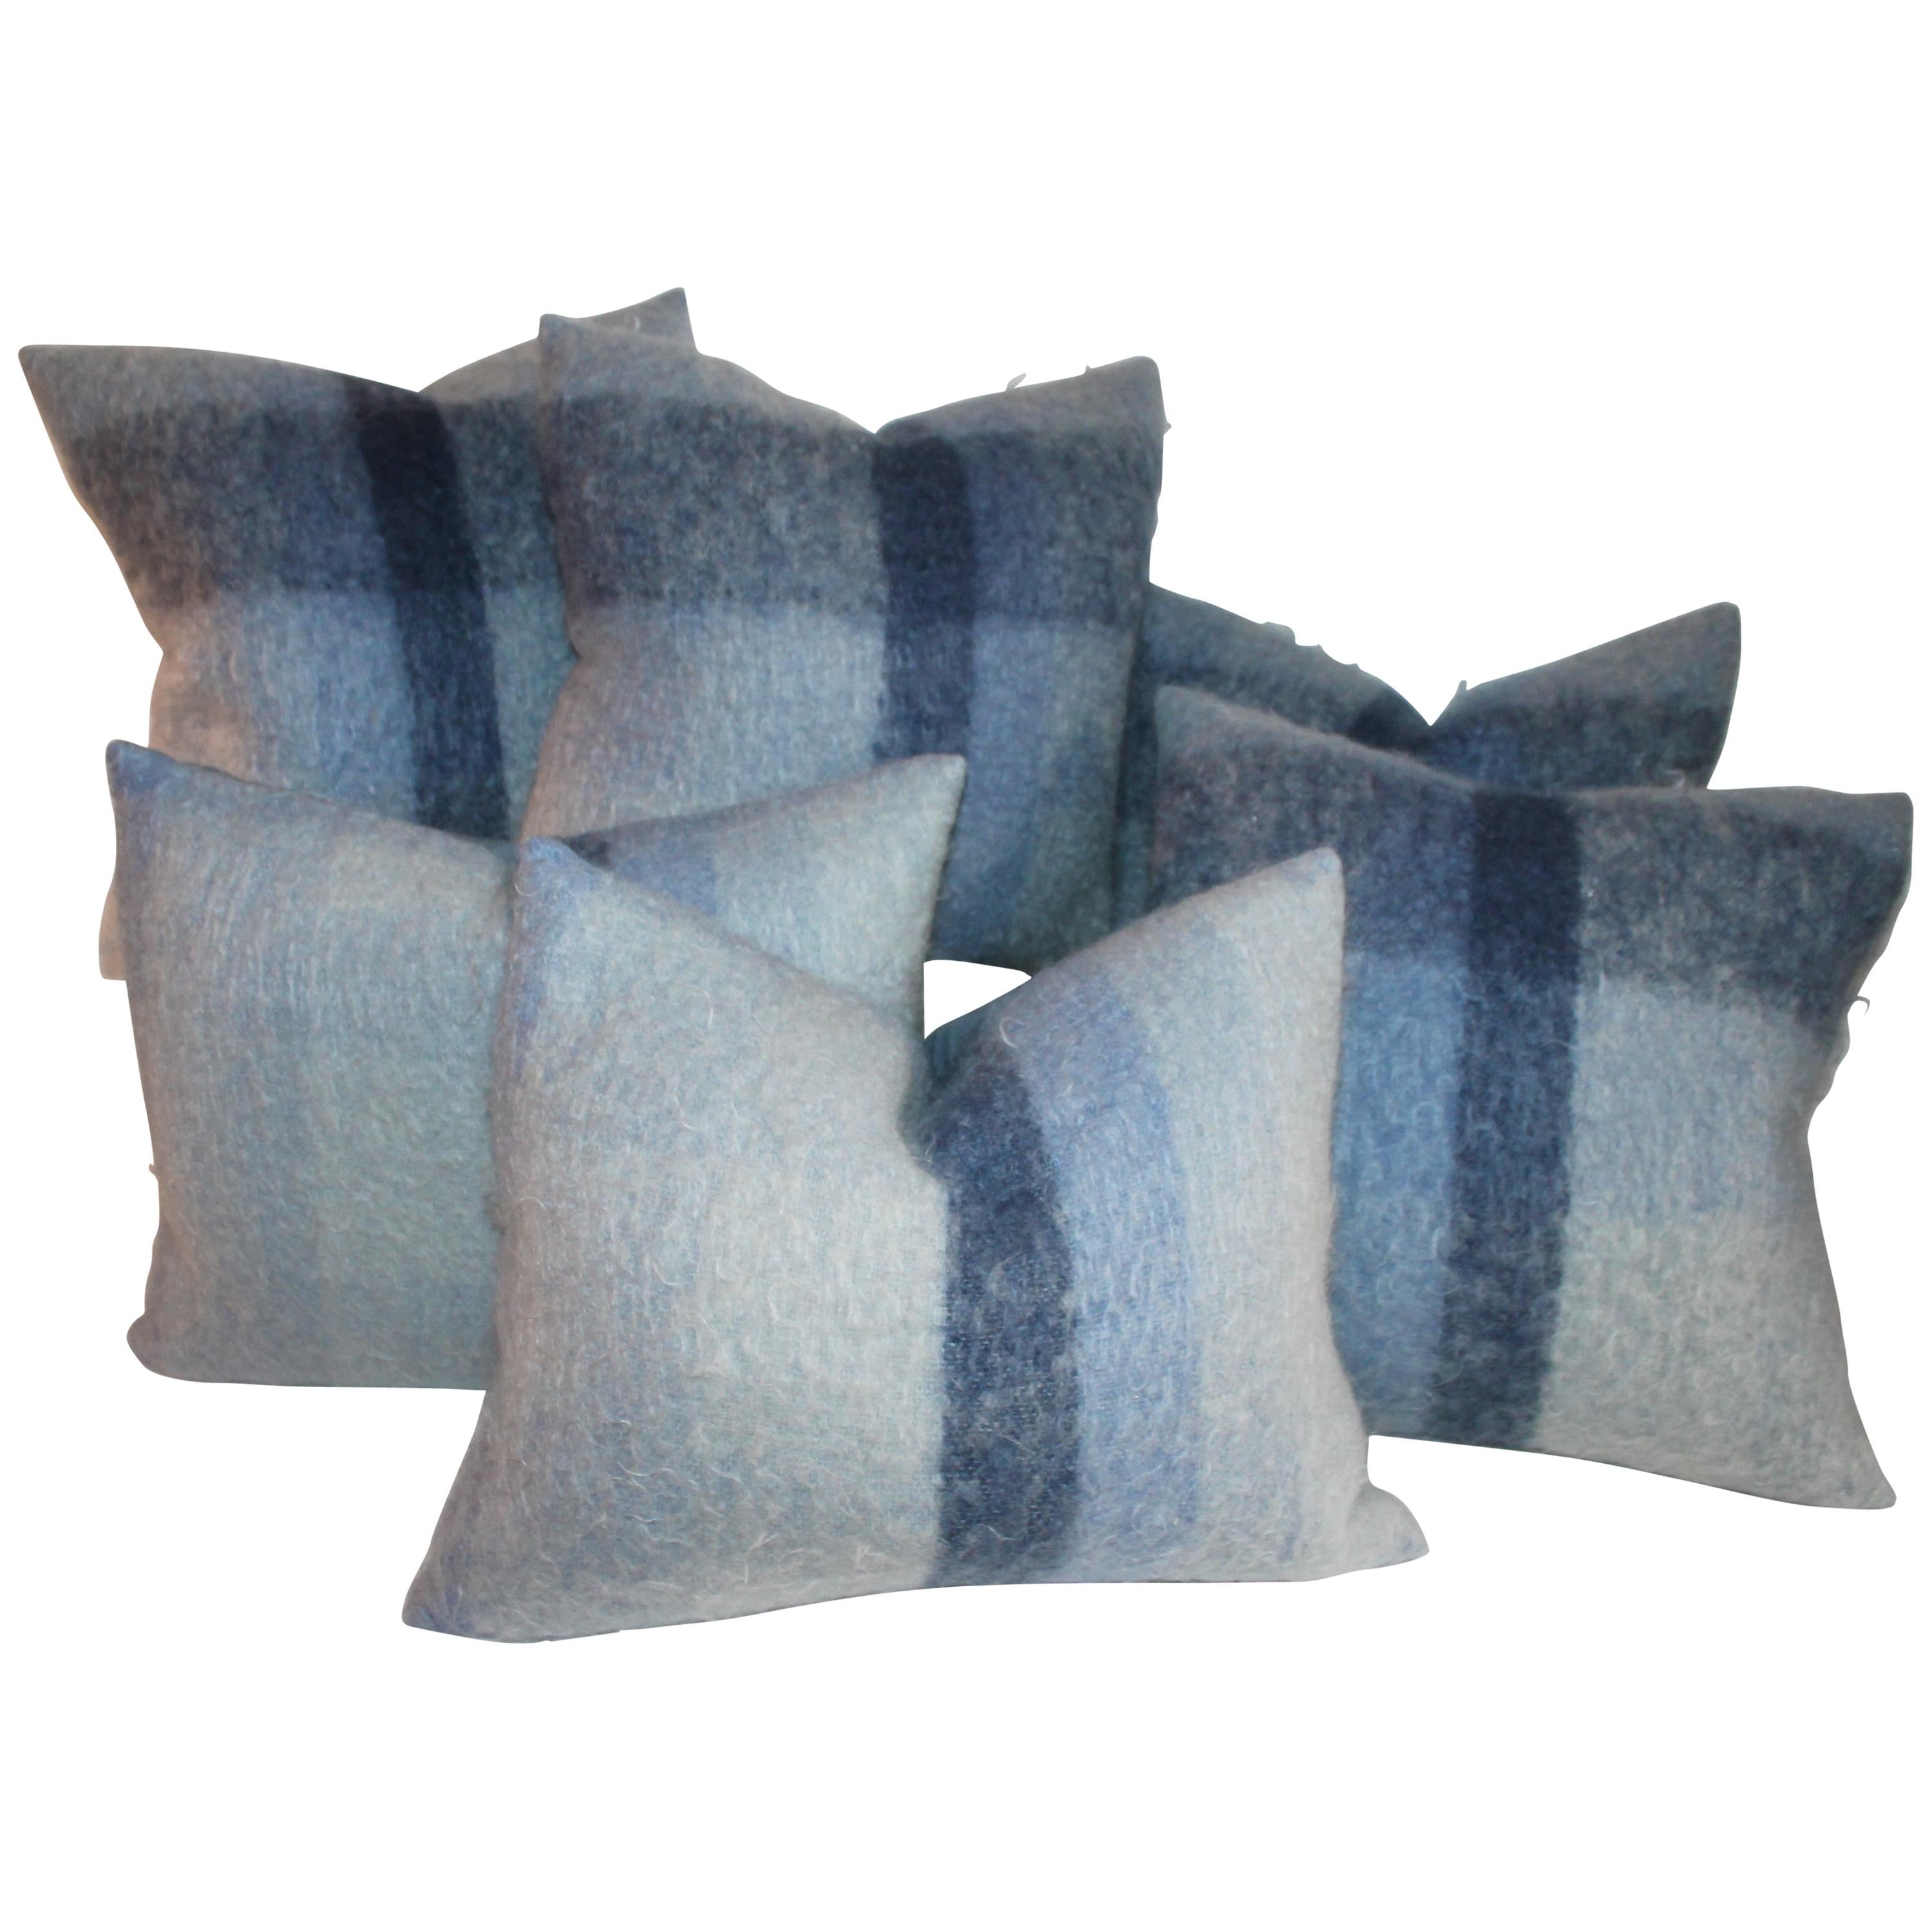 Mohair Pillows in Blues from Vintage Blanket, Pair